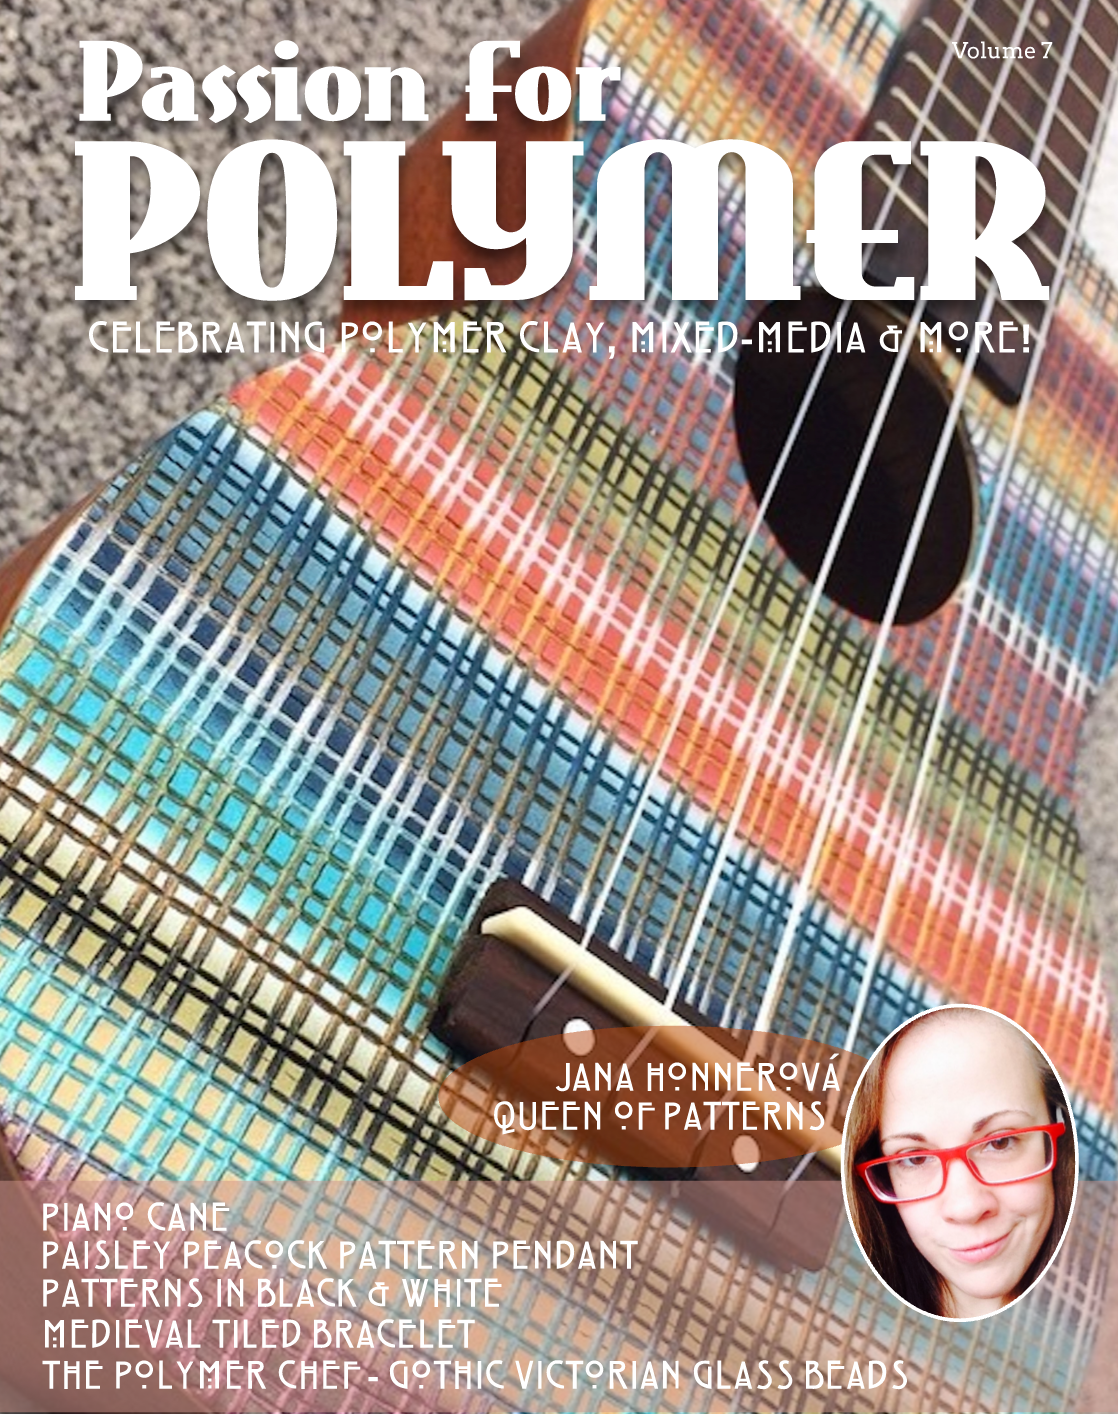 DIGITAL October 2019 Passion for Polymer clay magazine mixed media pdf download - Polymer Clay TV tutorial and supplies